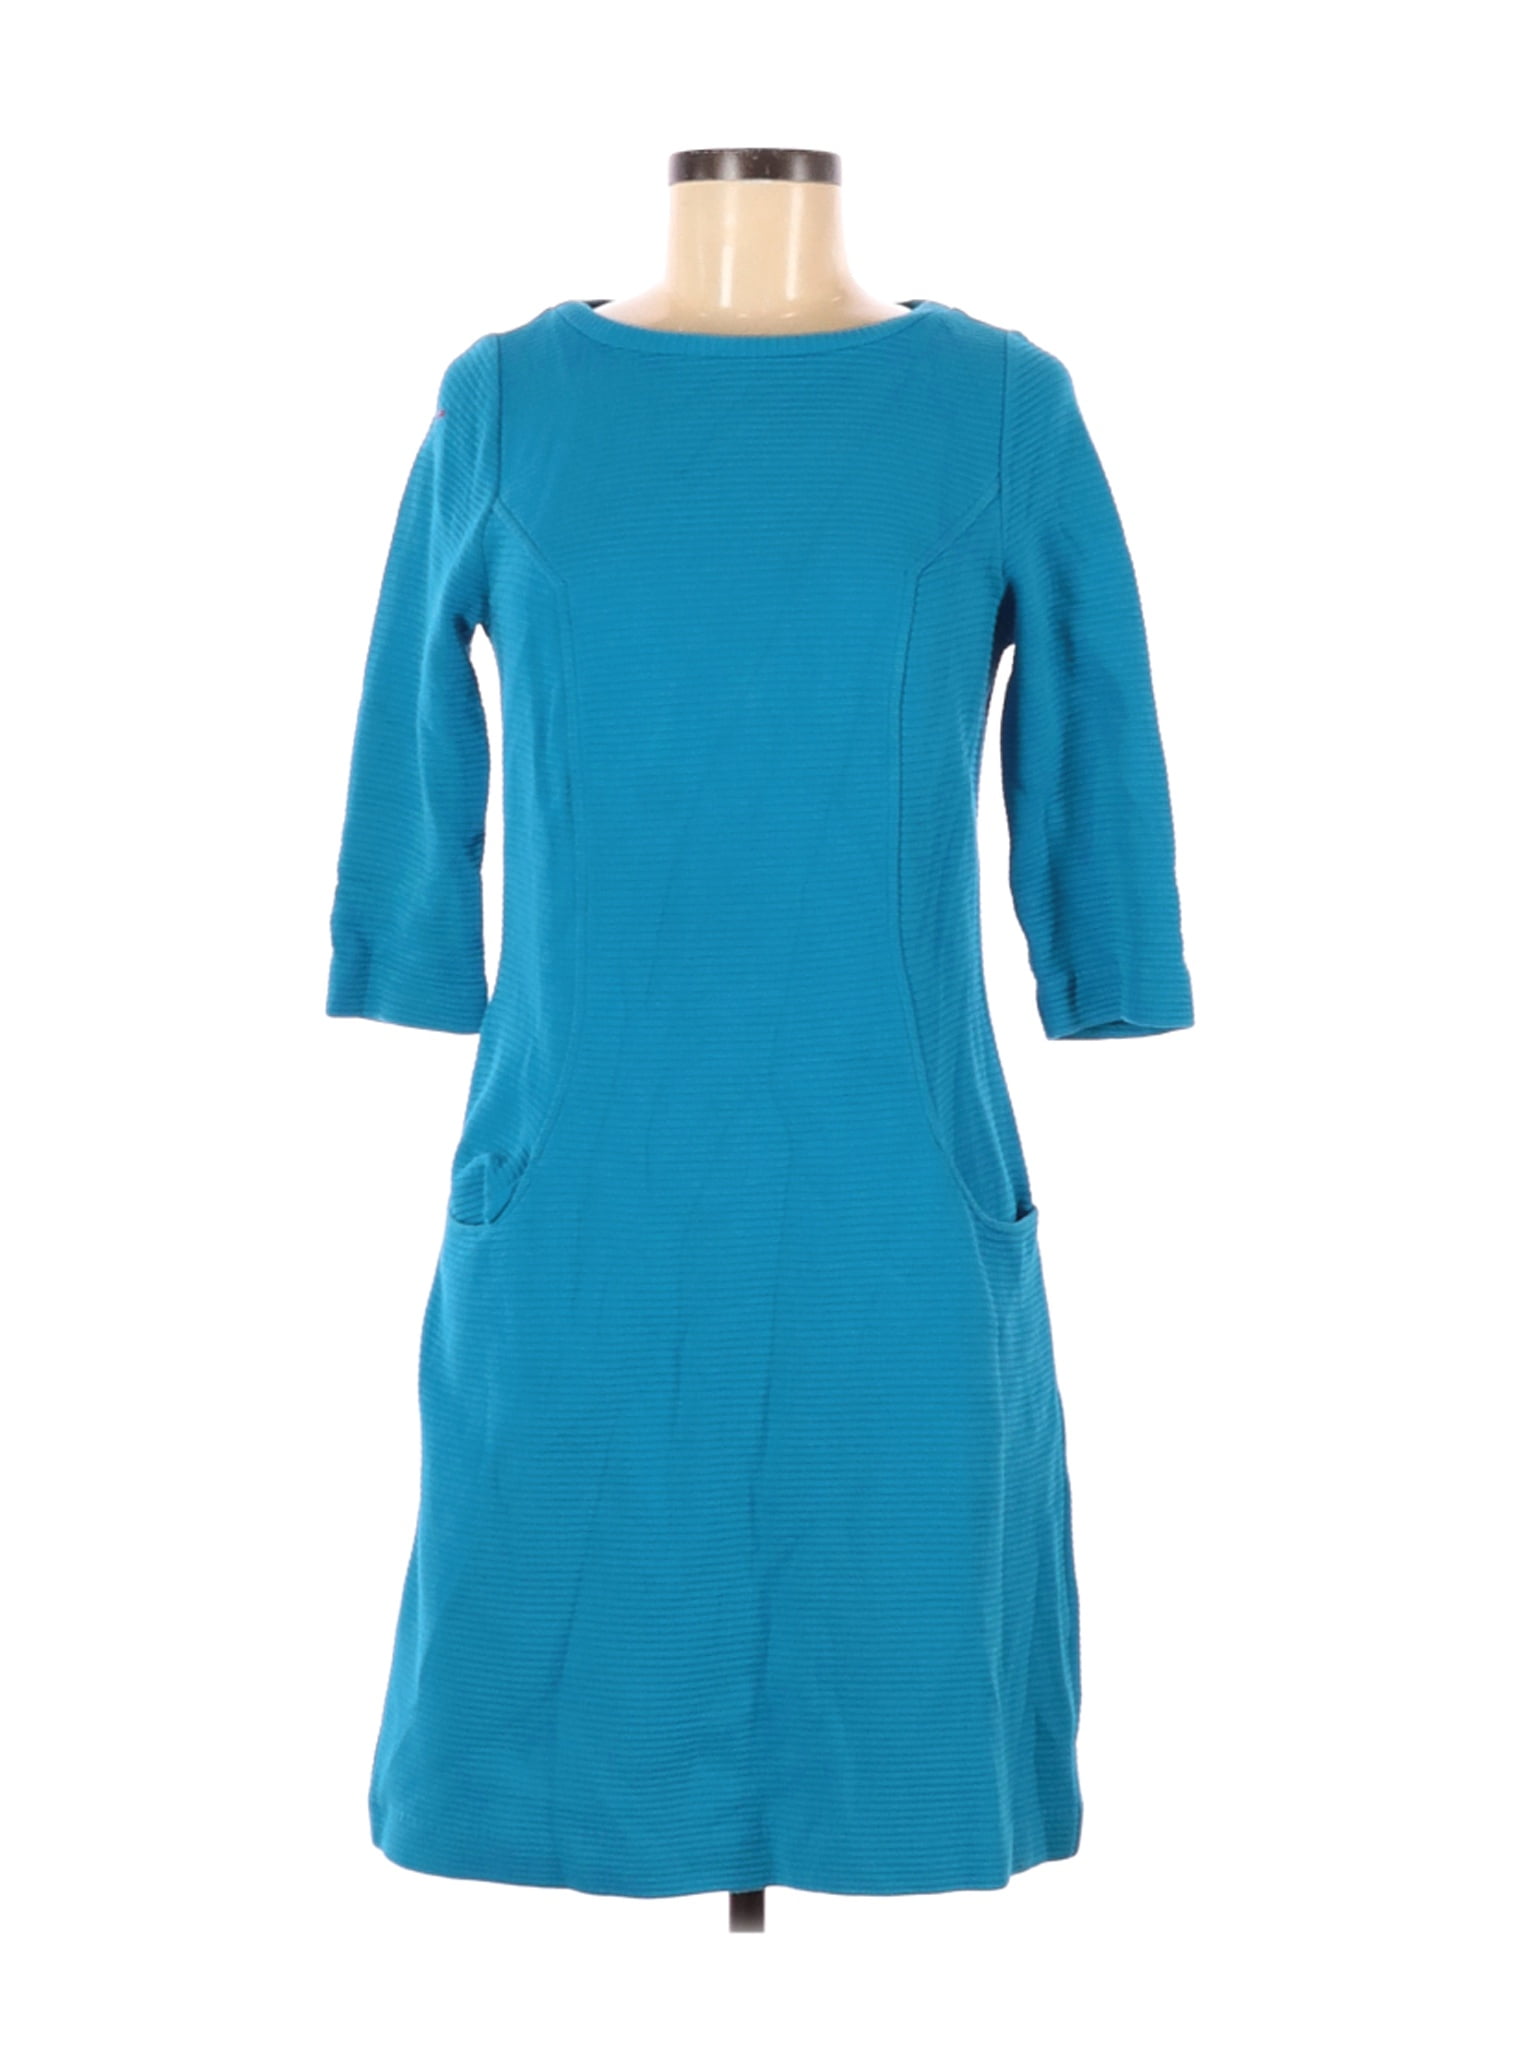 Boden - Pre-Owned Boden Women's Size 6 ...